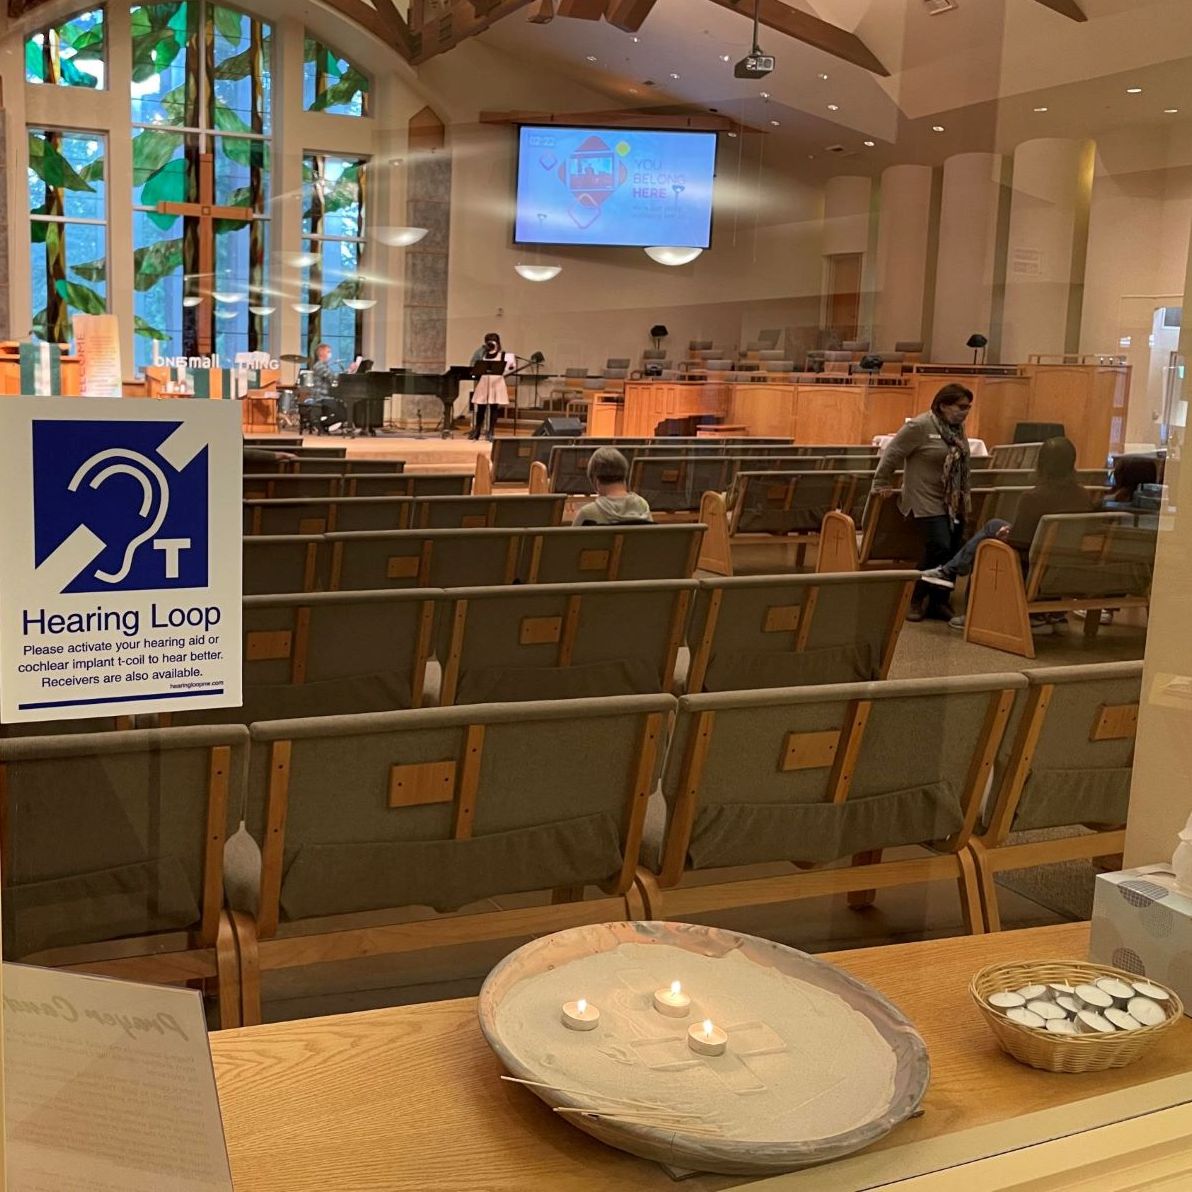 church sanctuary with a sign about hearing loop use.